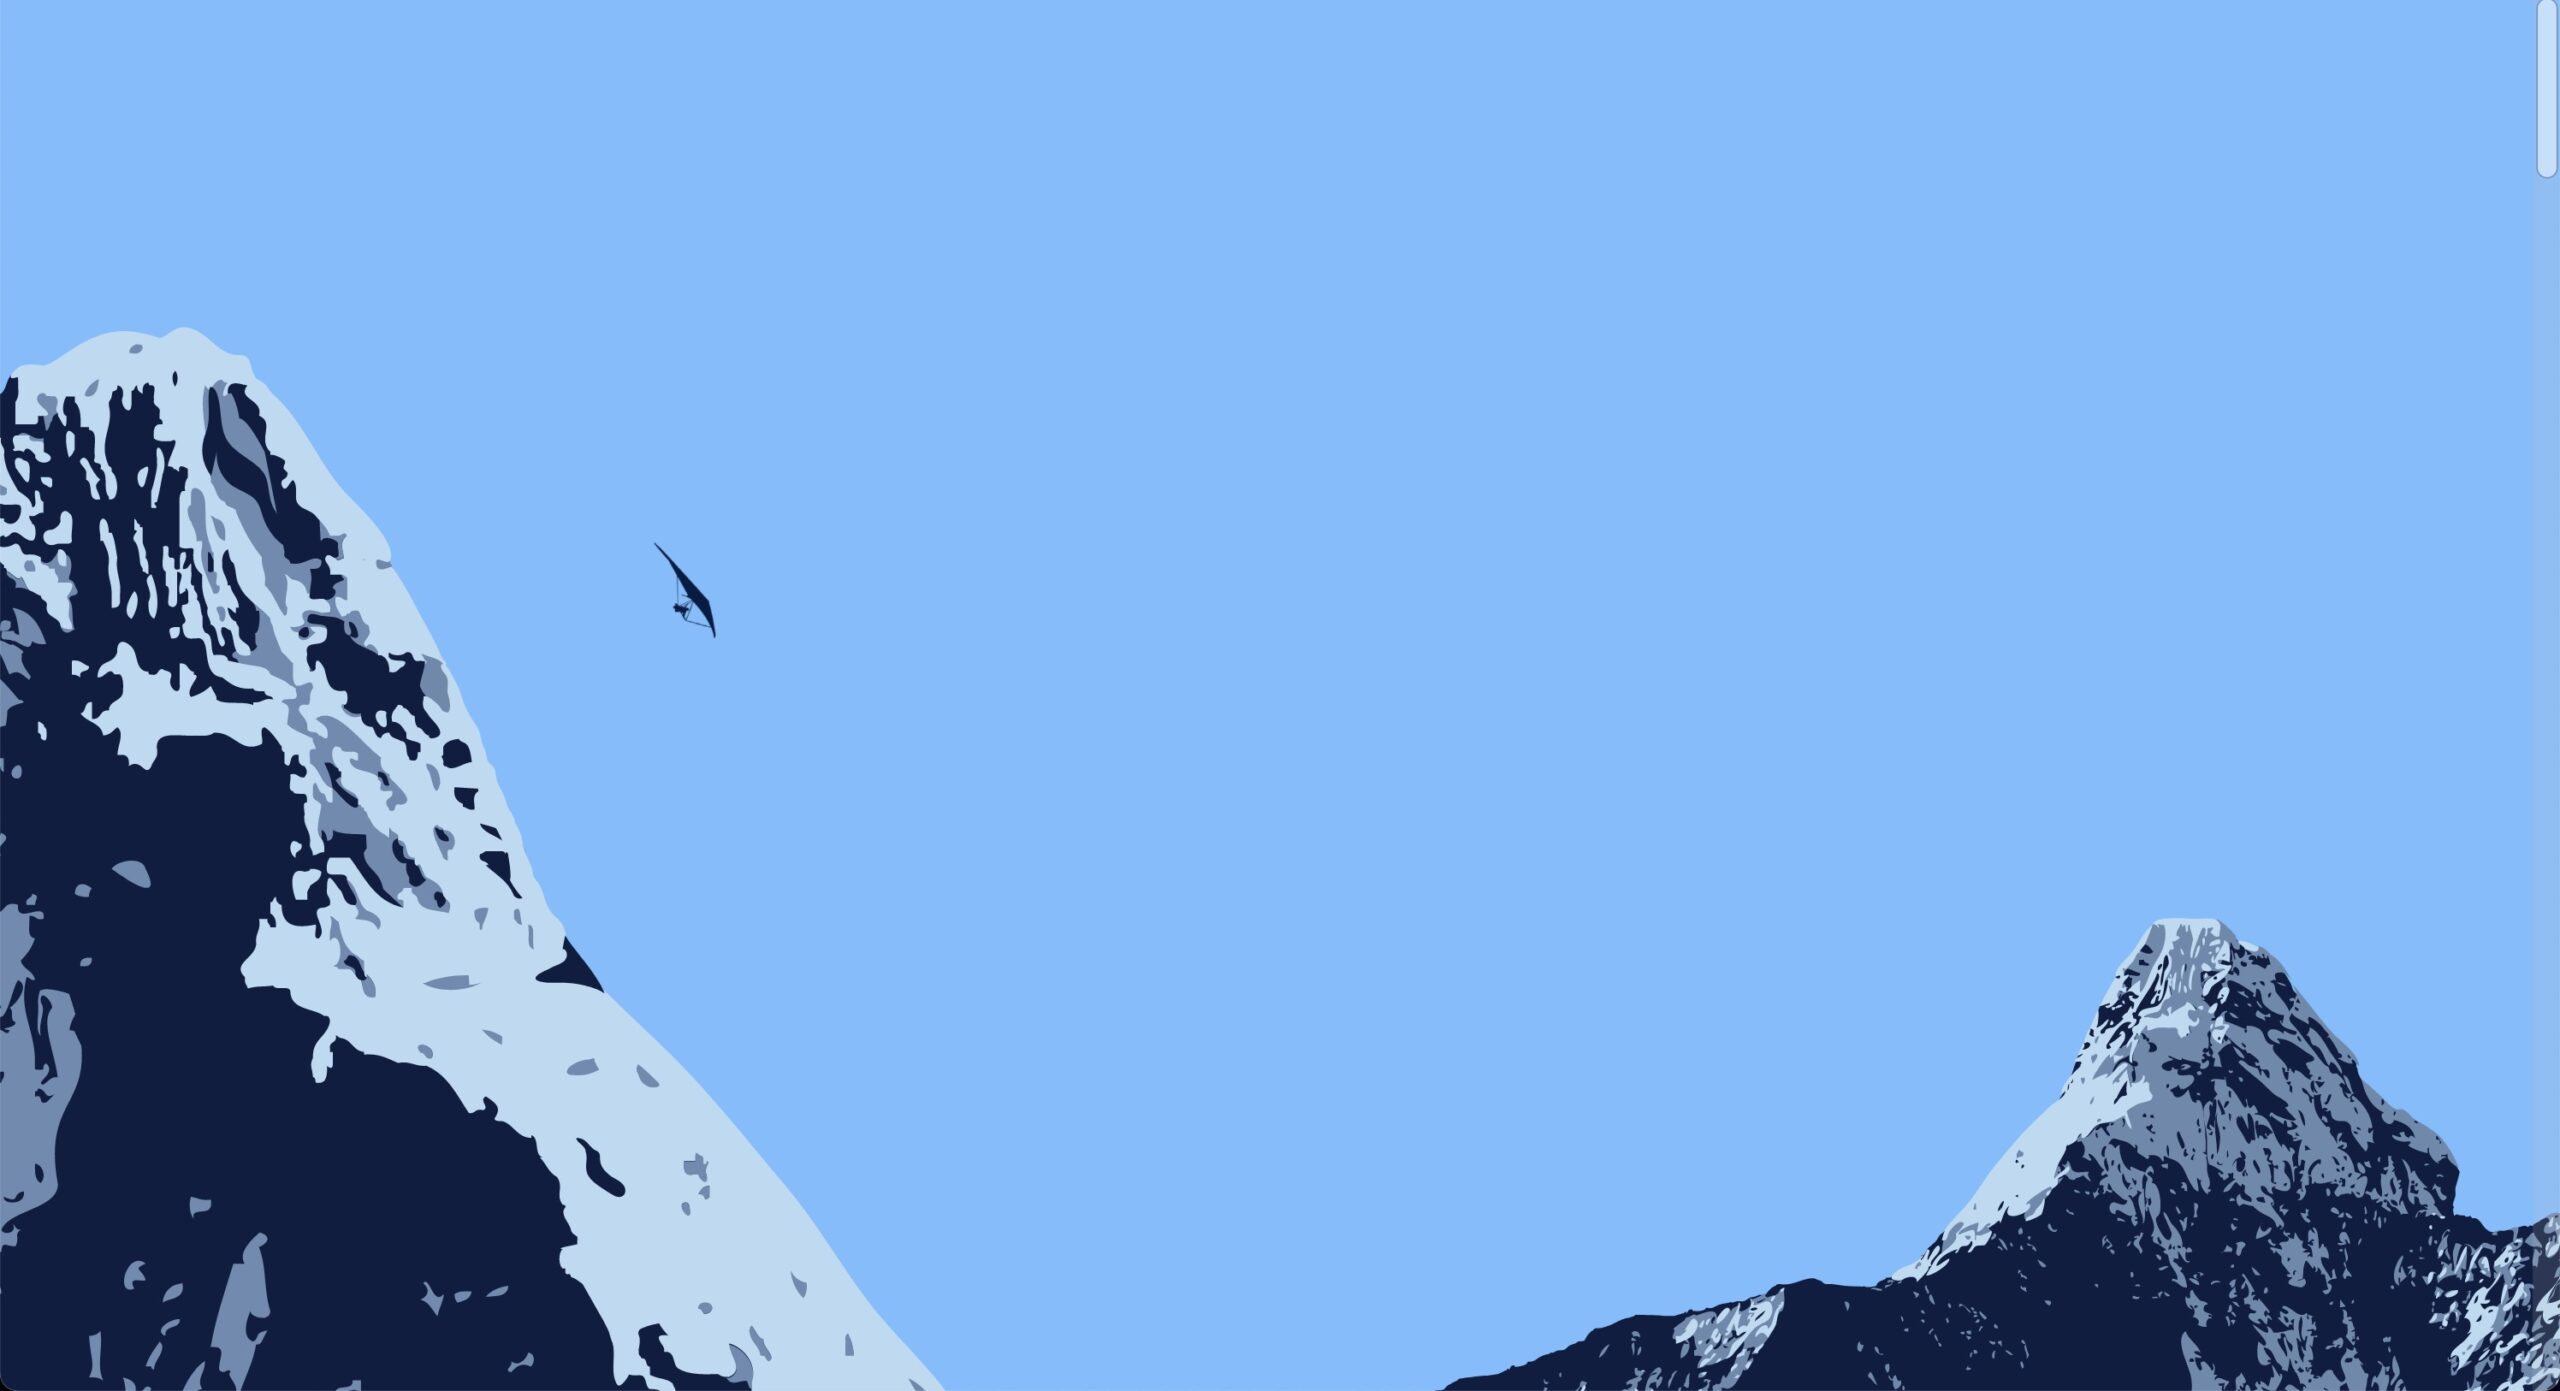 Hang glider and mountains background image.